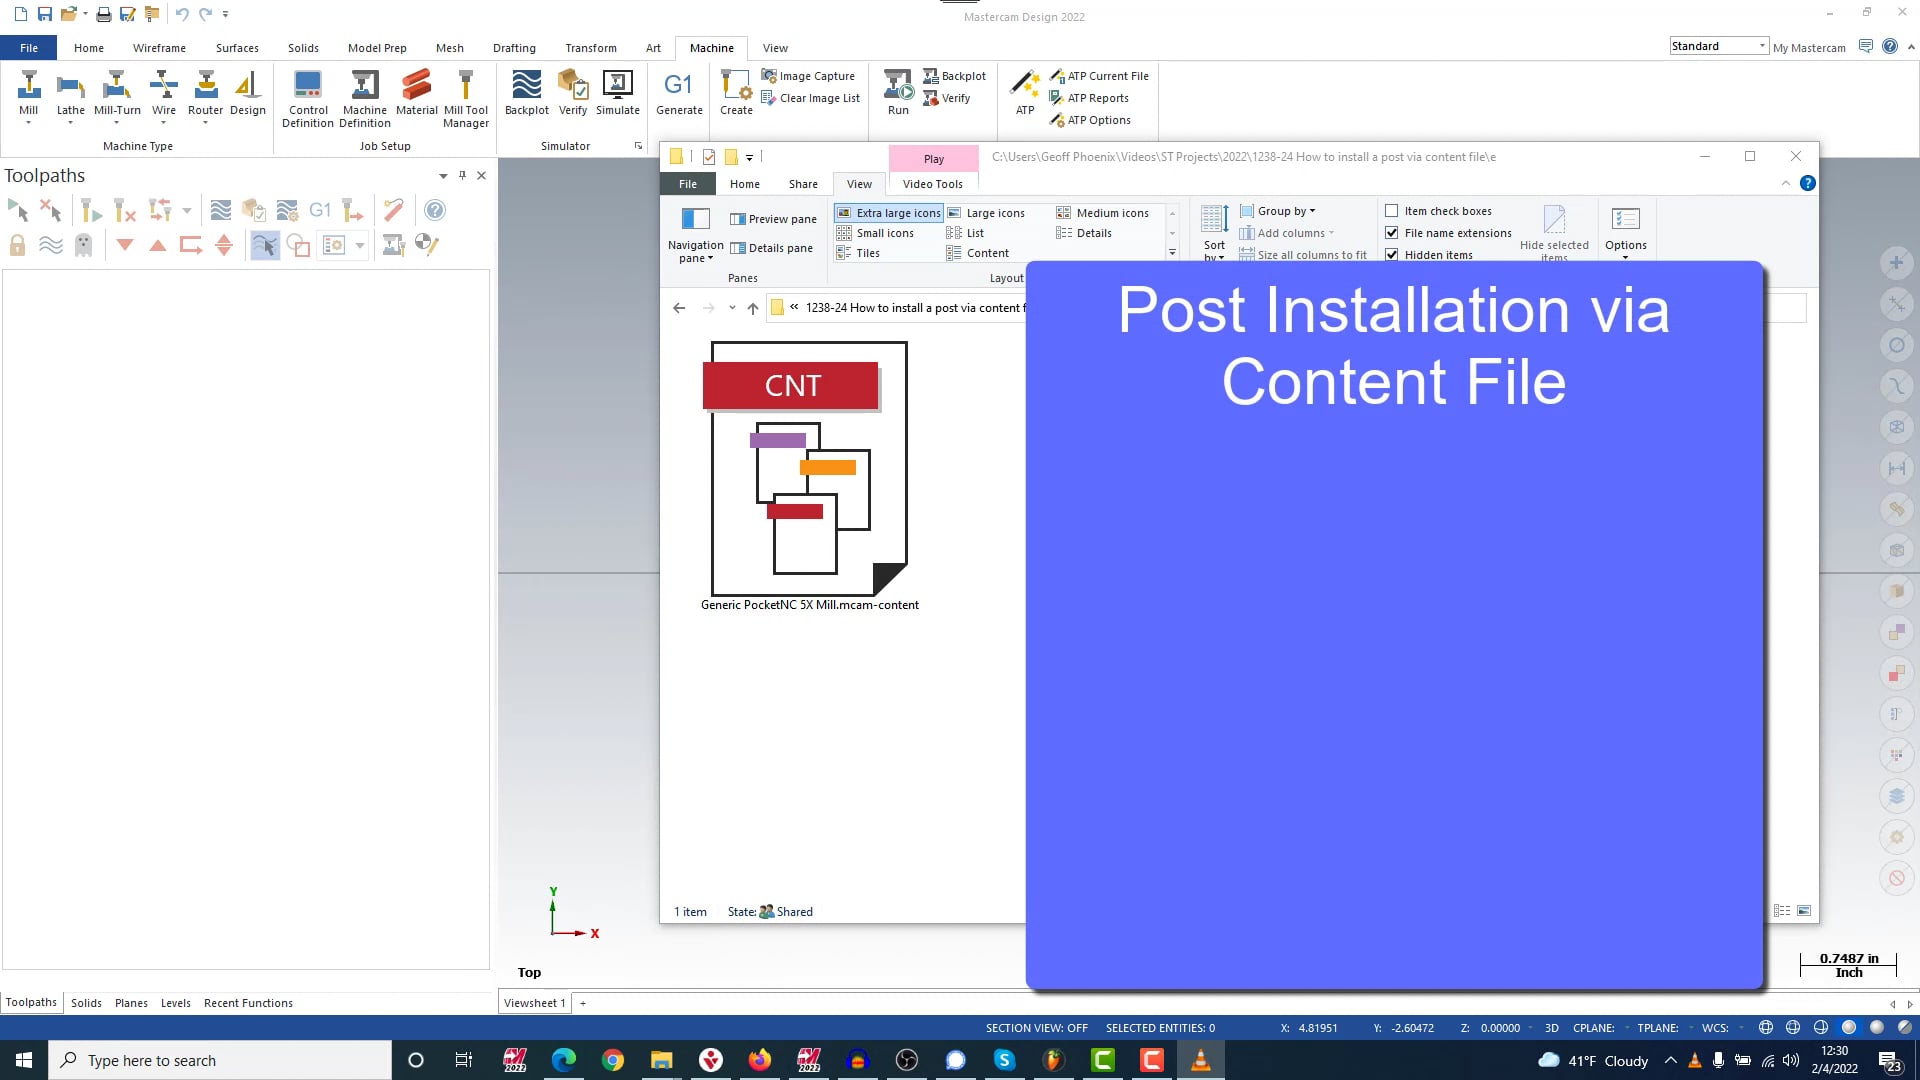 How to install a post via content file